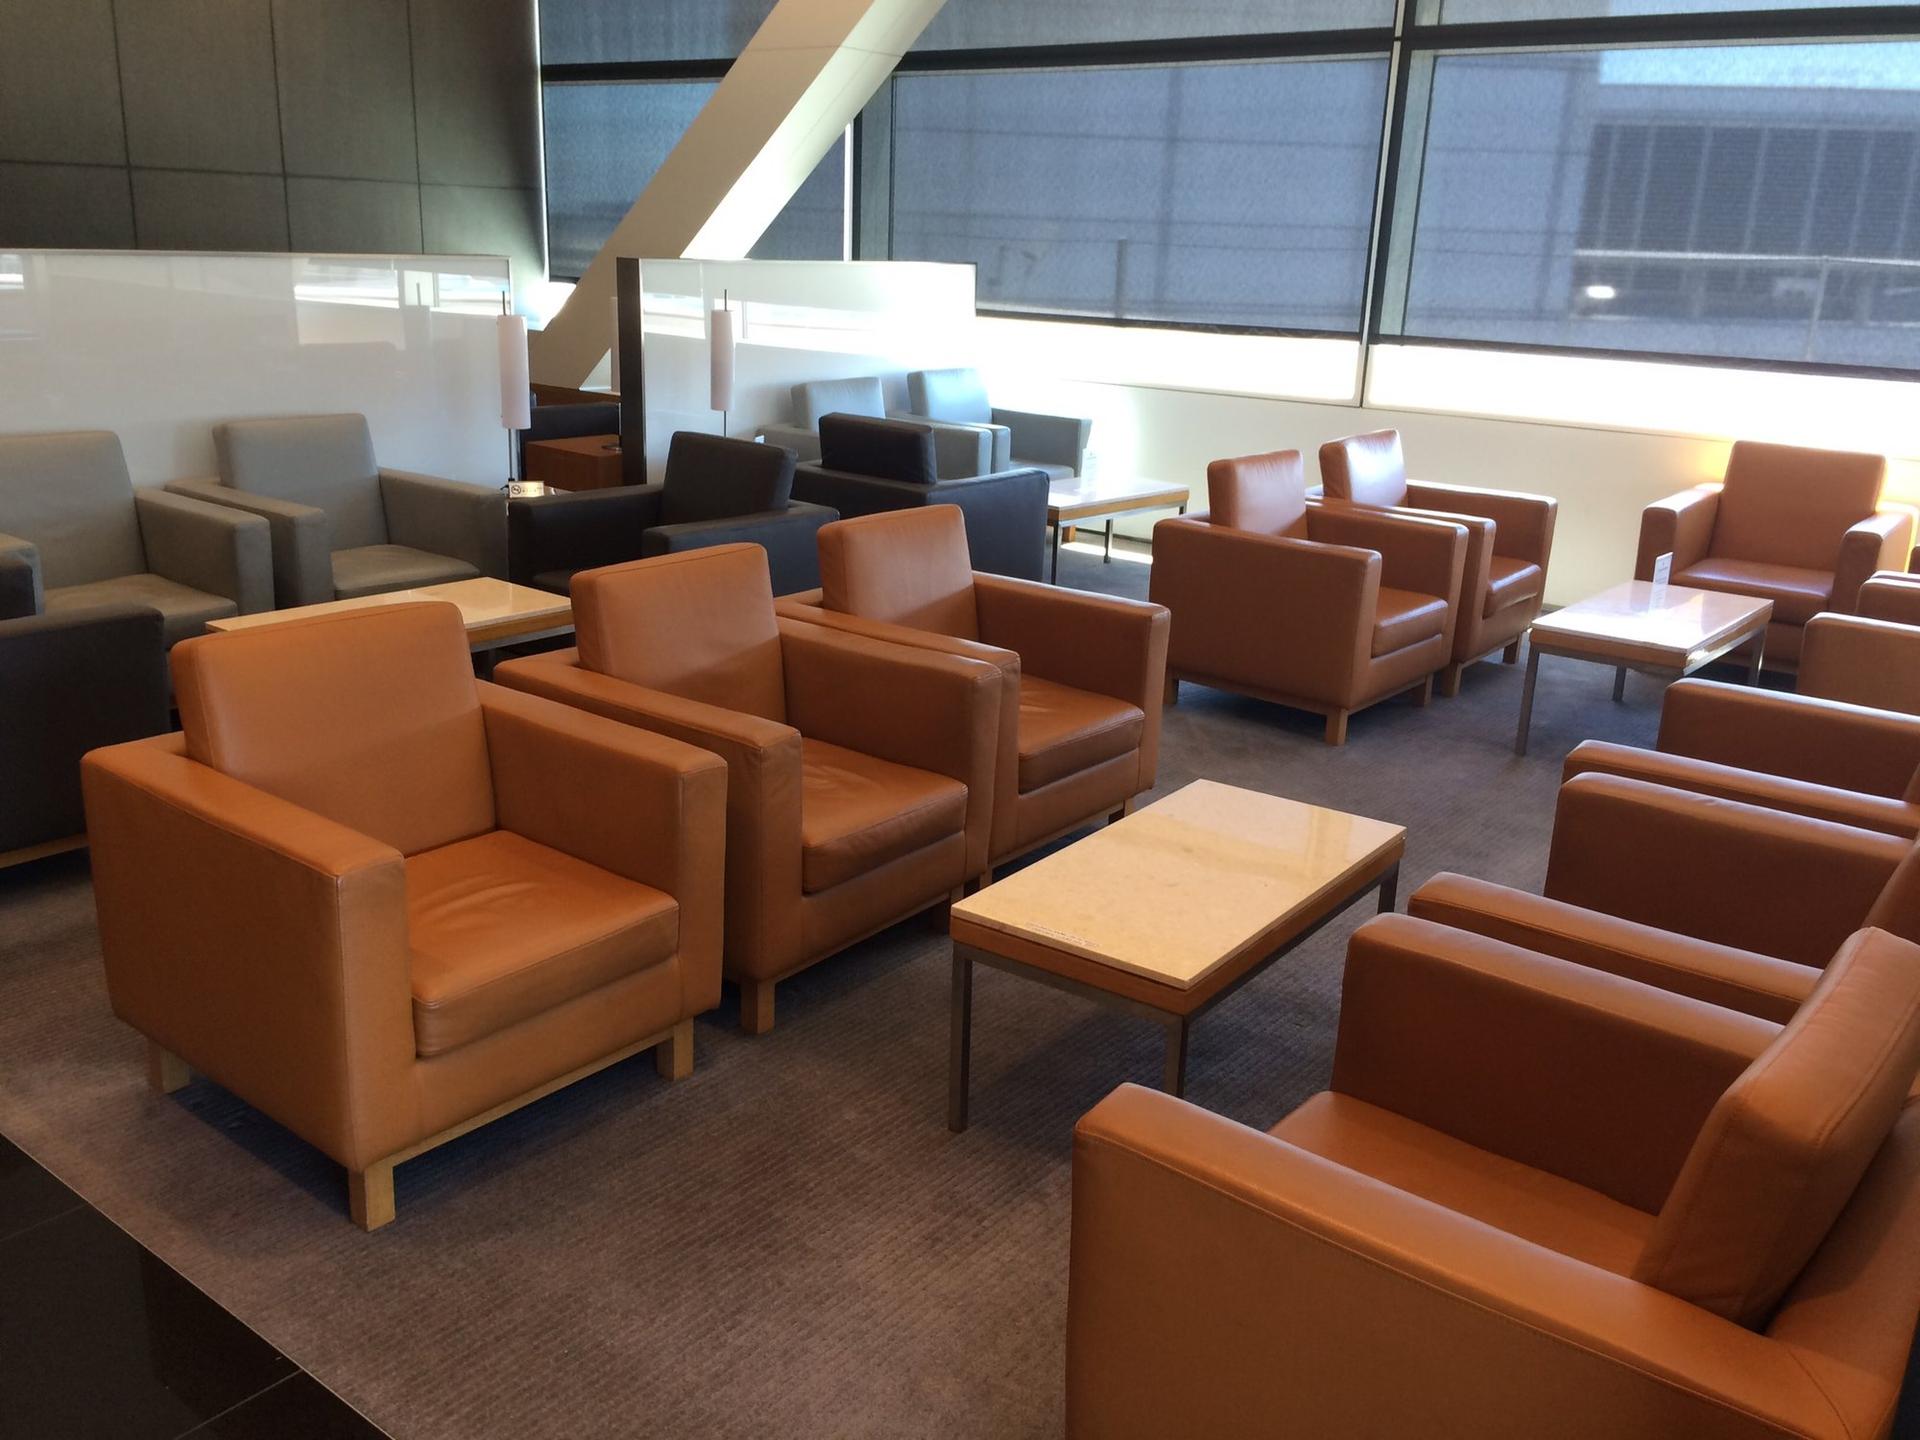 Cathay Pacific First and Business Class Lounge image 46 of 74